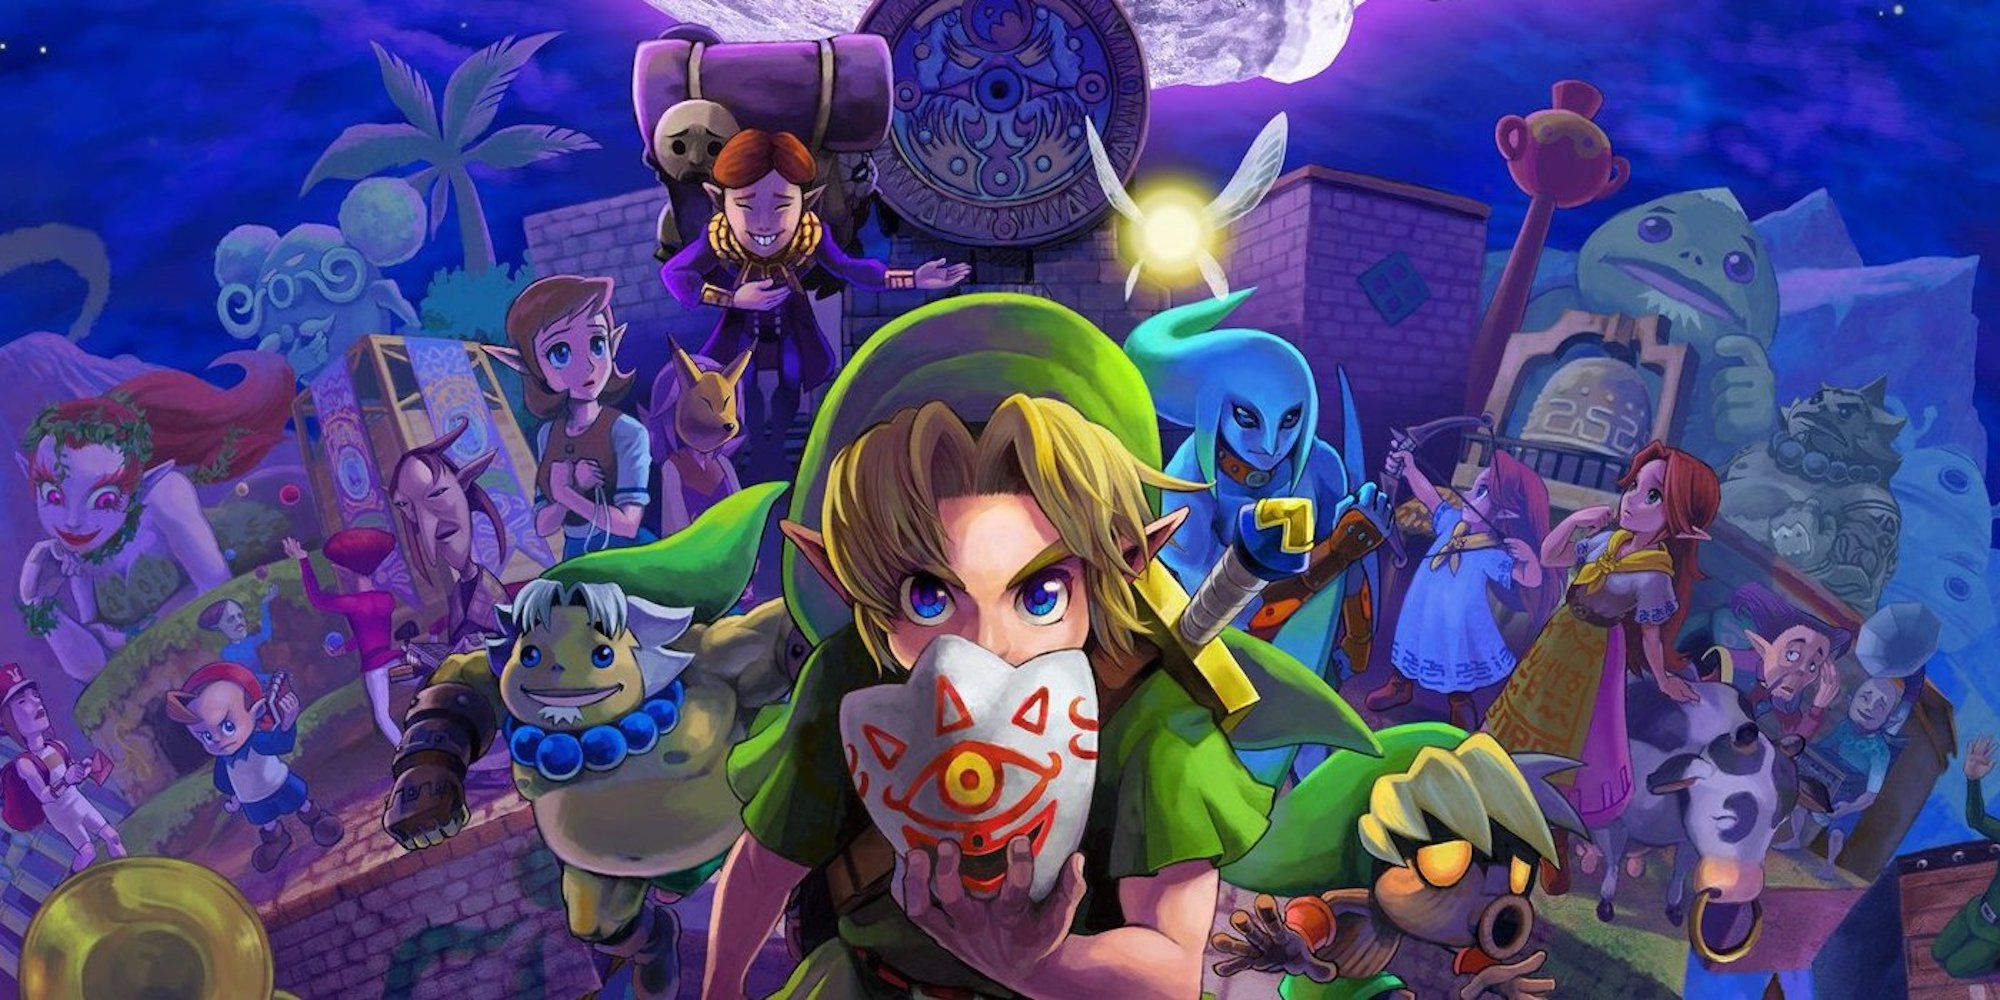 Promo art featuring characters from The Legend of Zelda Majora's Mask